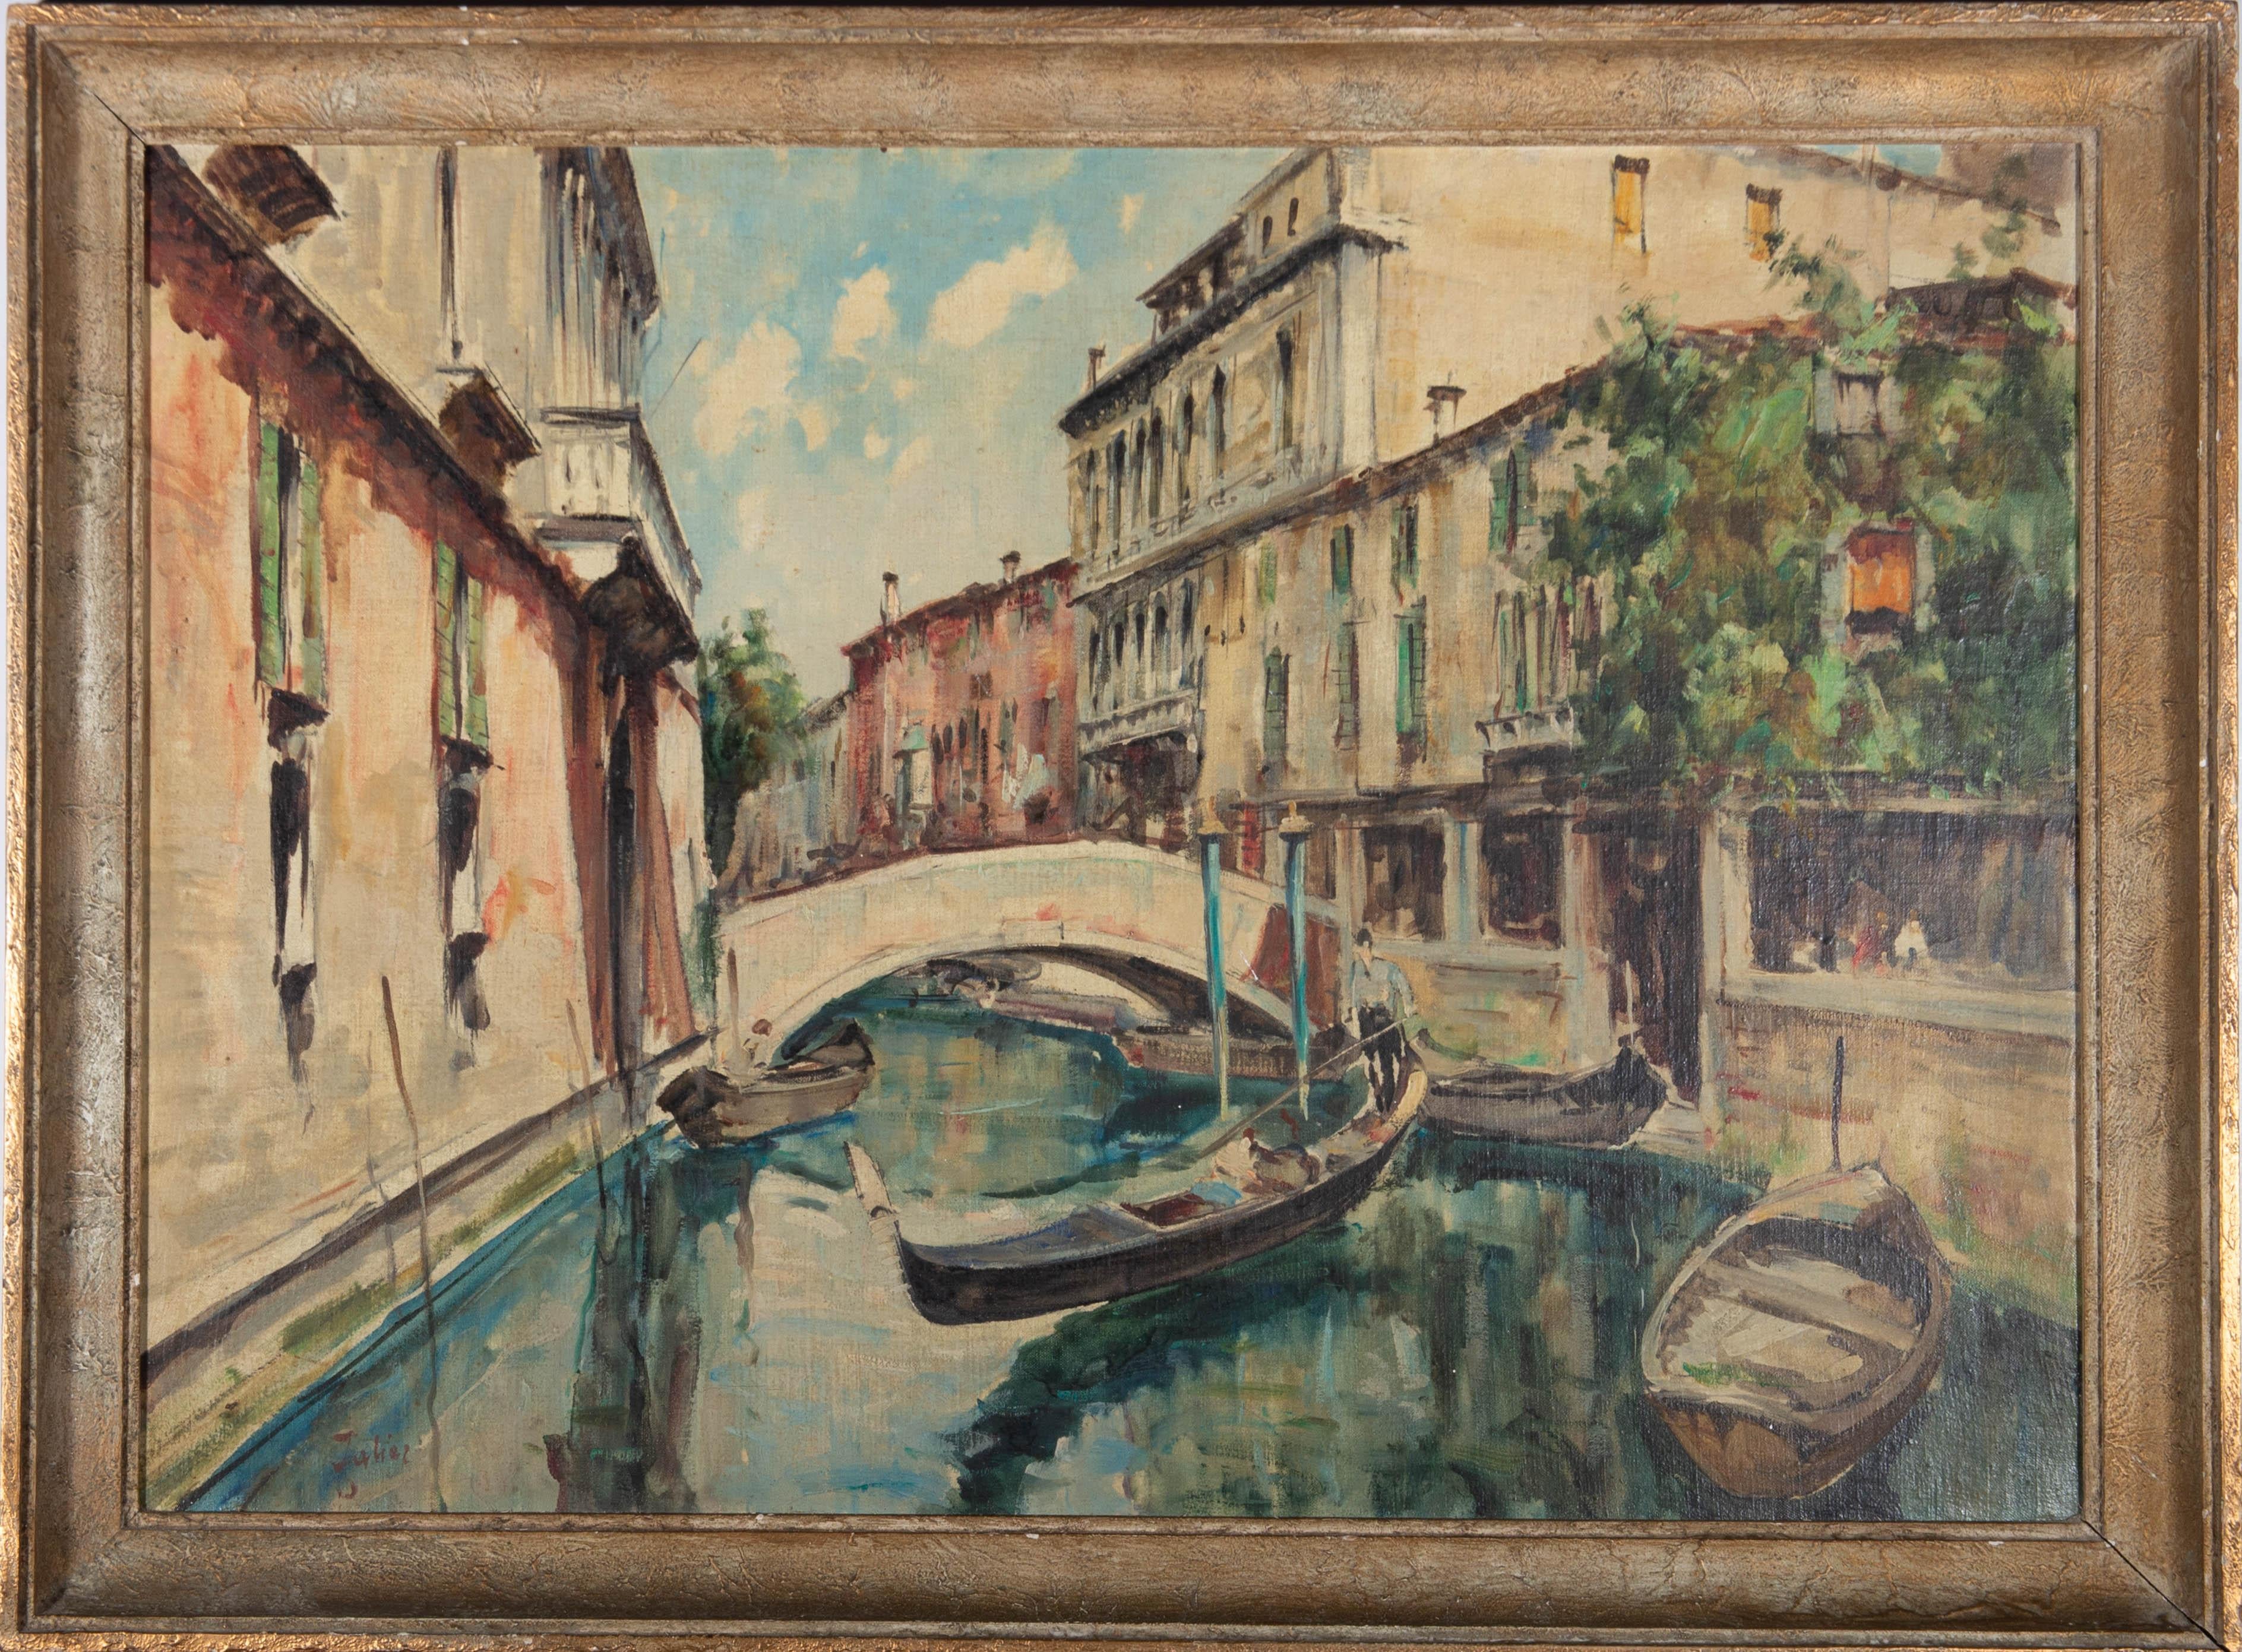 An impressionistic view along a Venetian canal. Presented in a textured gilt-effect wooden frame. Signed to the lower-left edge. On canvas board.
